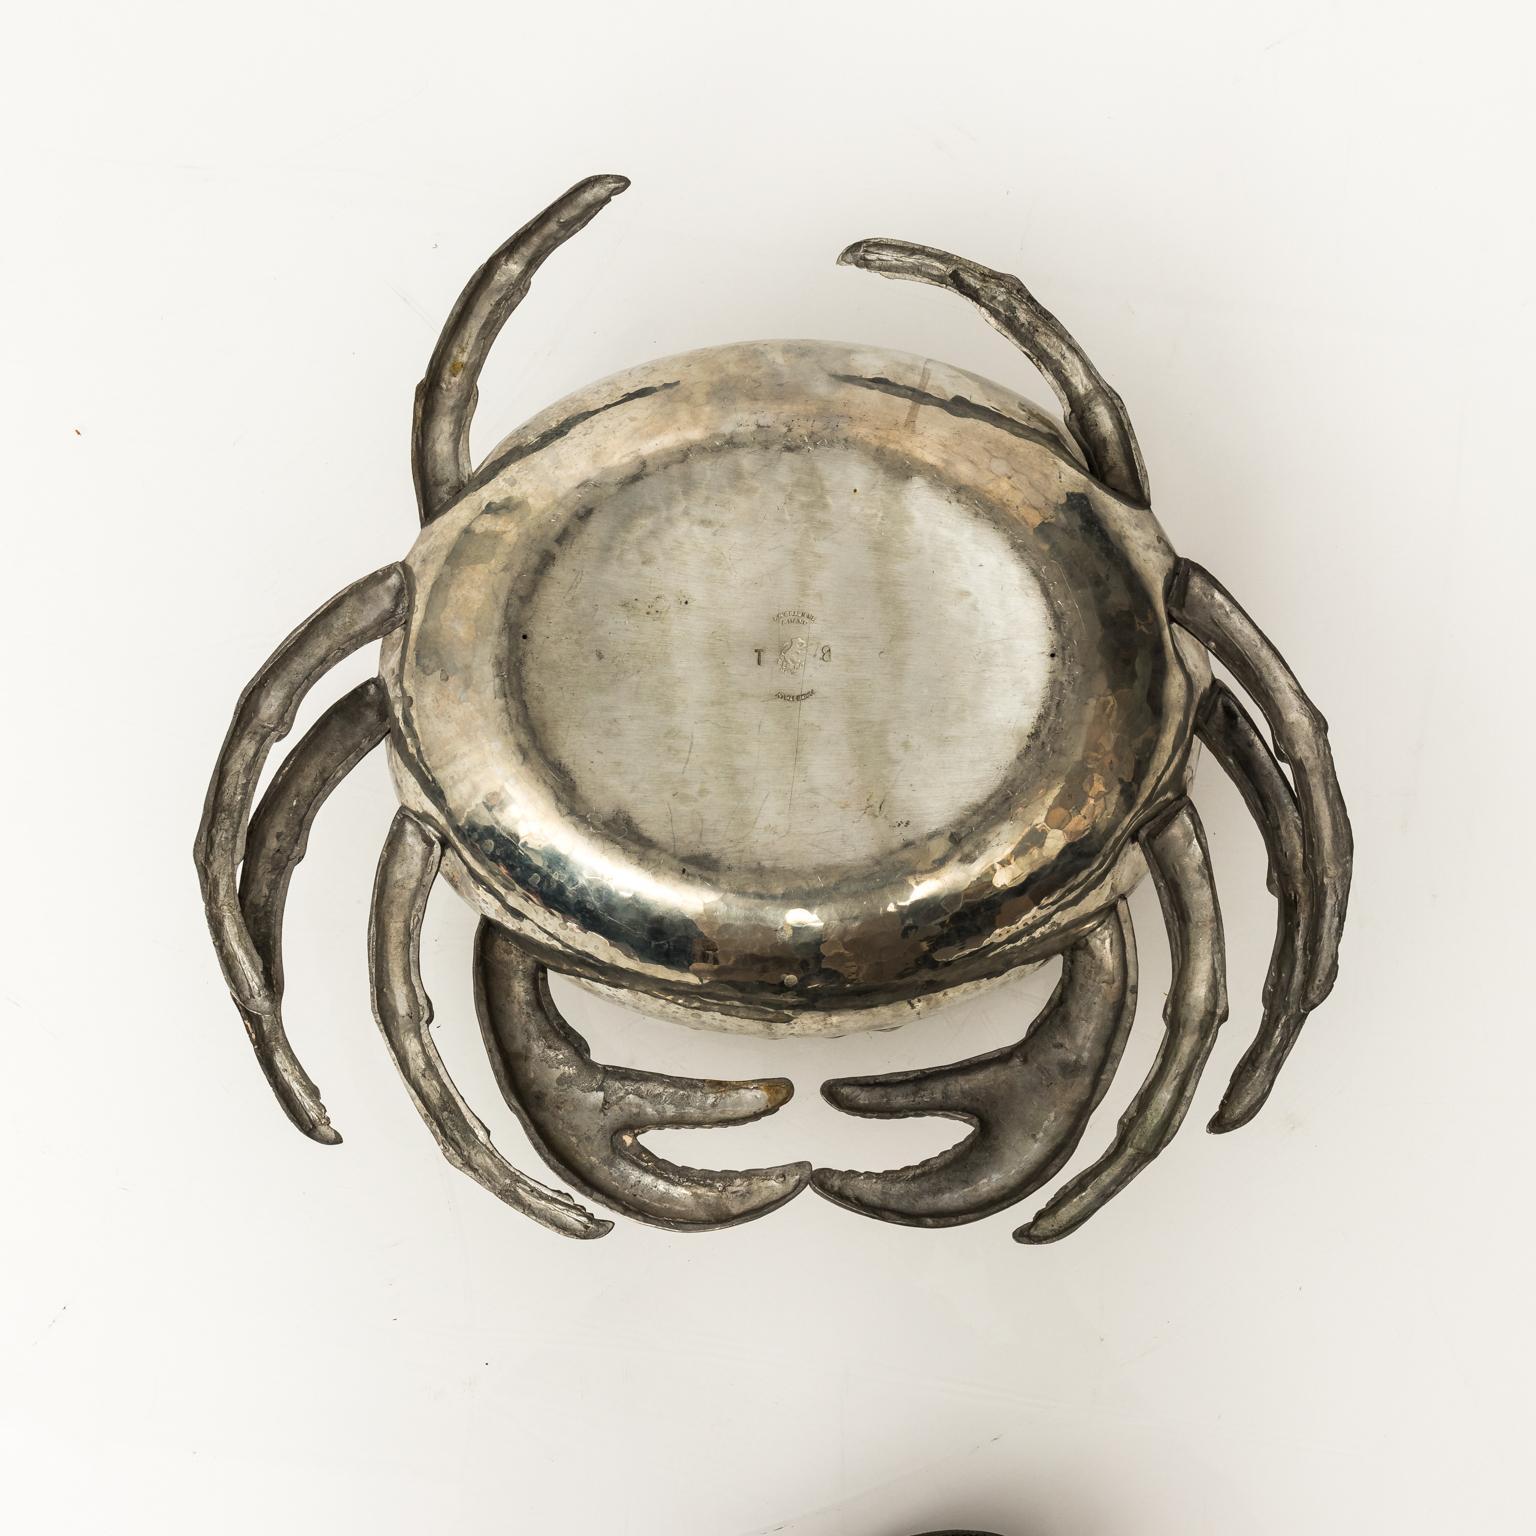 Two-piece hand-hammered pewter figural covered box modeled in the form of a crab, circa 1960. Marked with a 